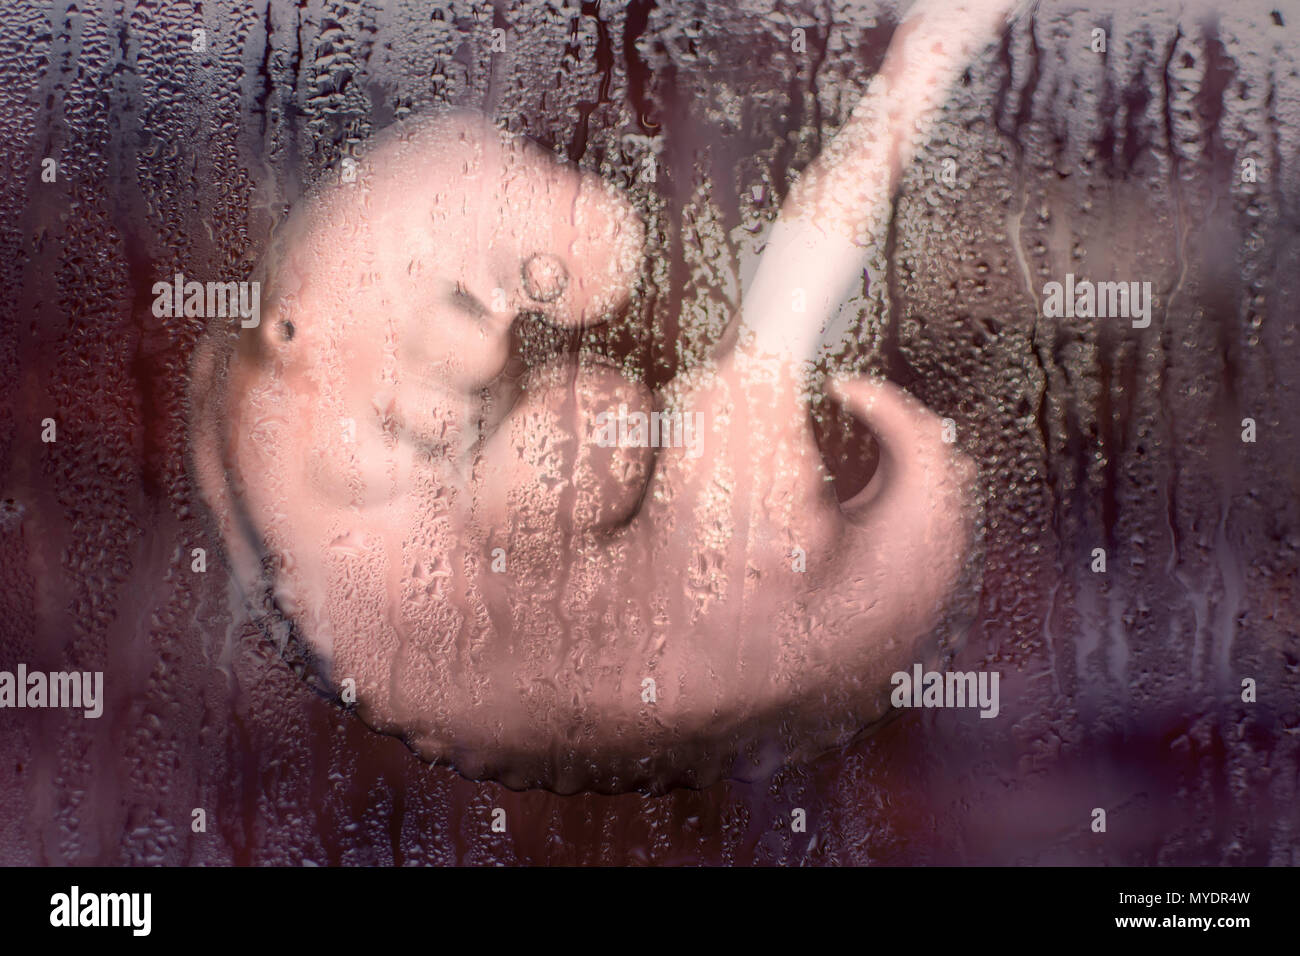 Abortion, conceptual illustration. 4-week human embryo behind window with condensation illustrating post-abortion depression. Stock Photo